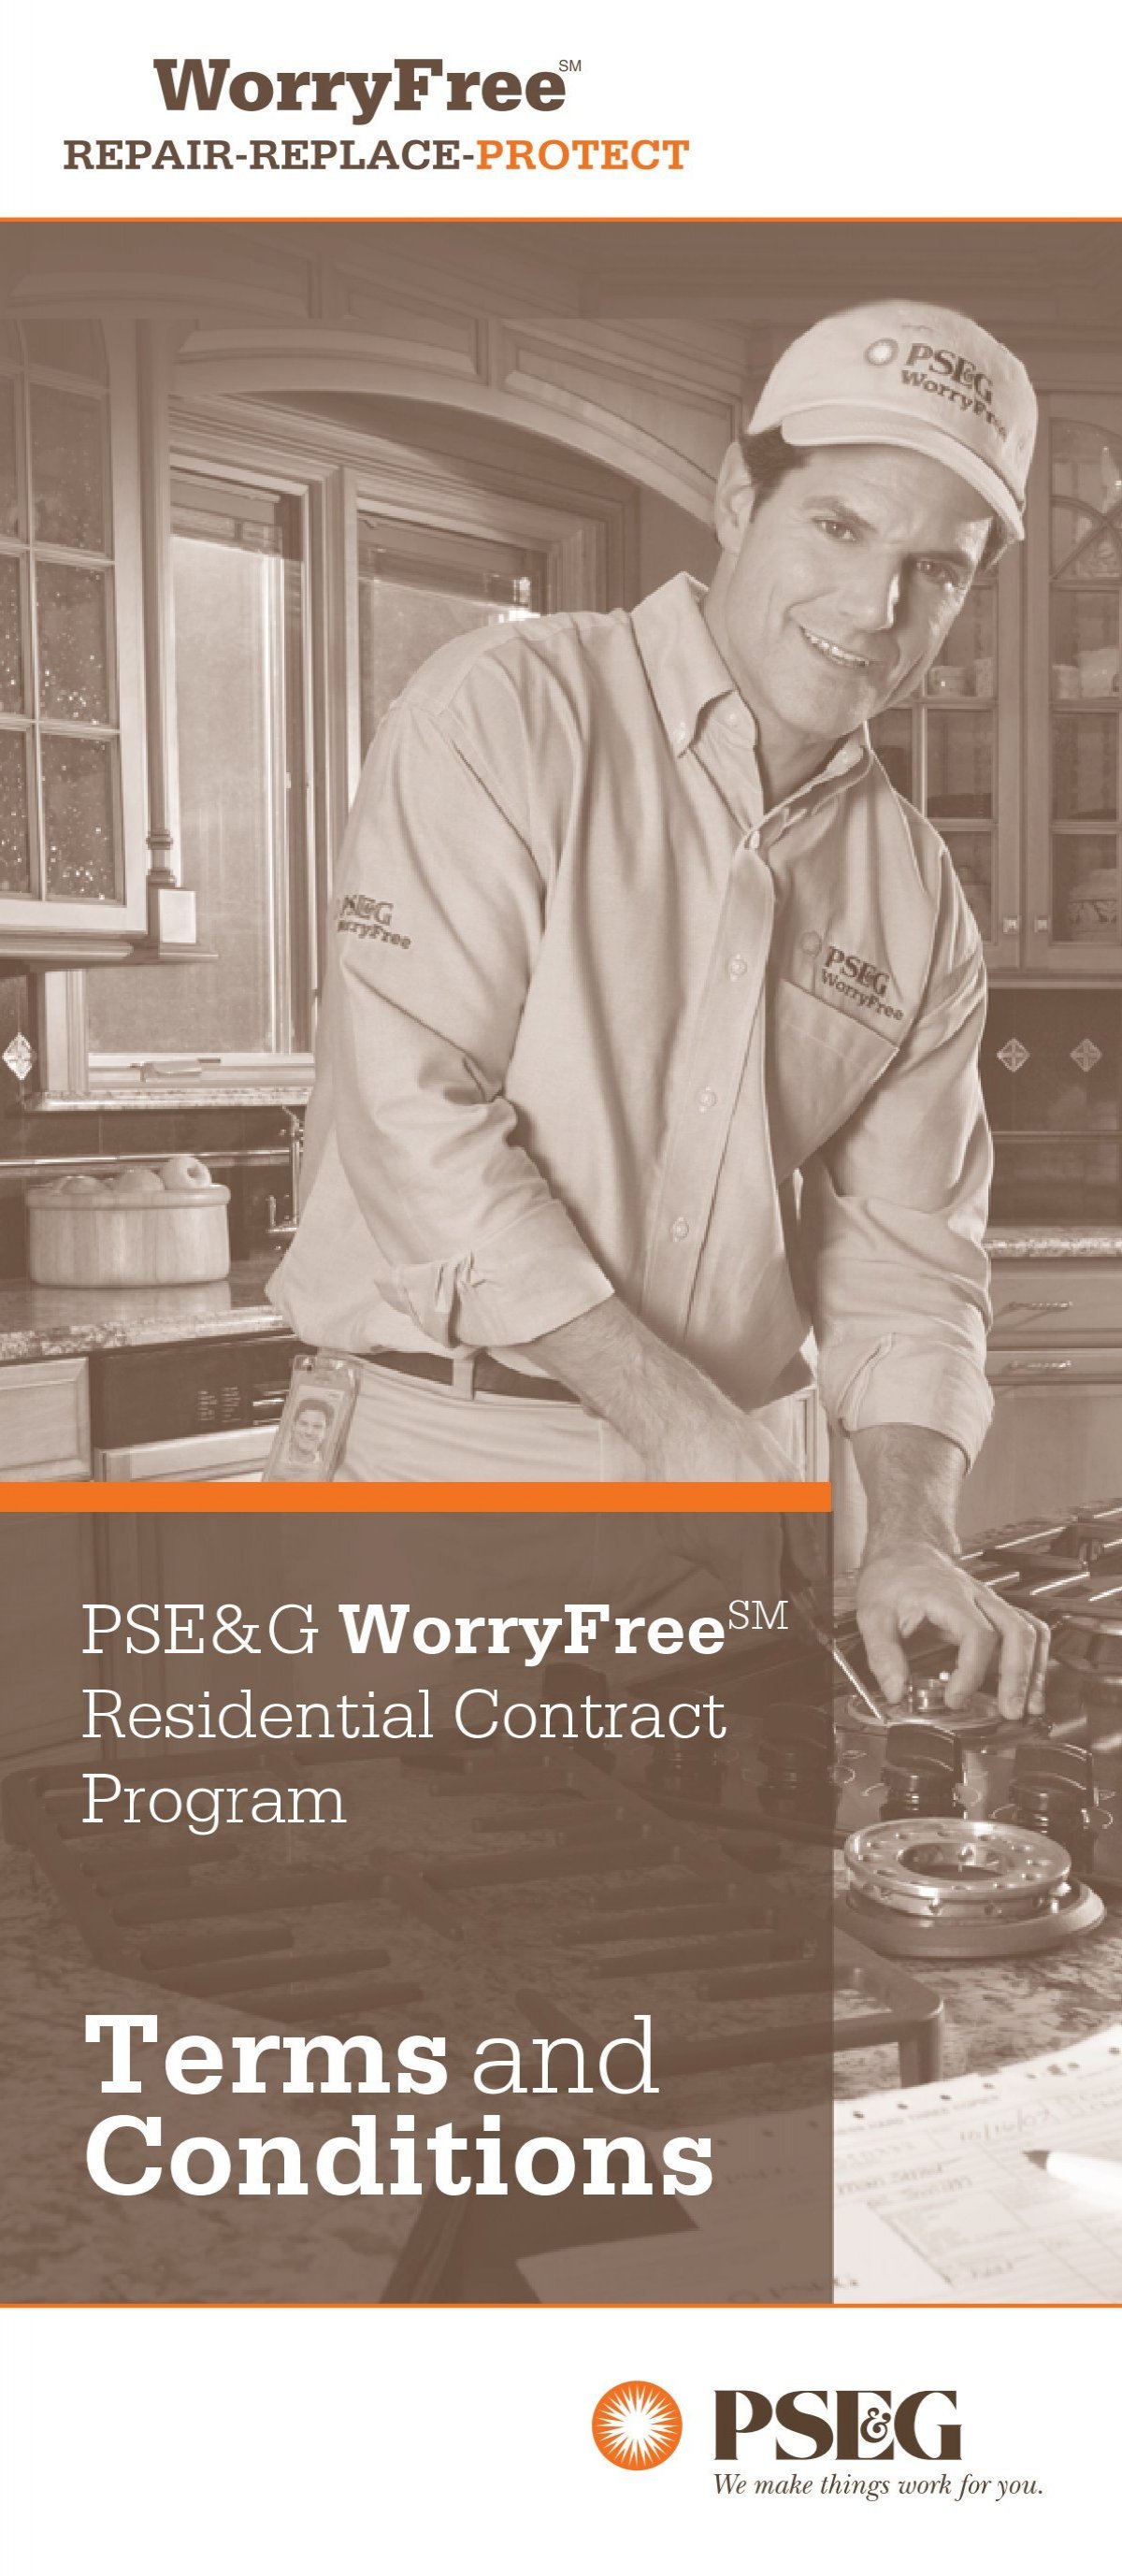 WorryFree Premier Hot Water Boiler Protection - PSE&G